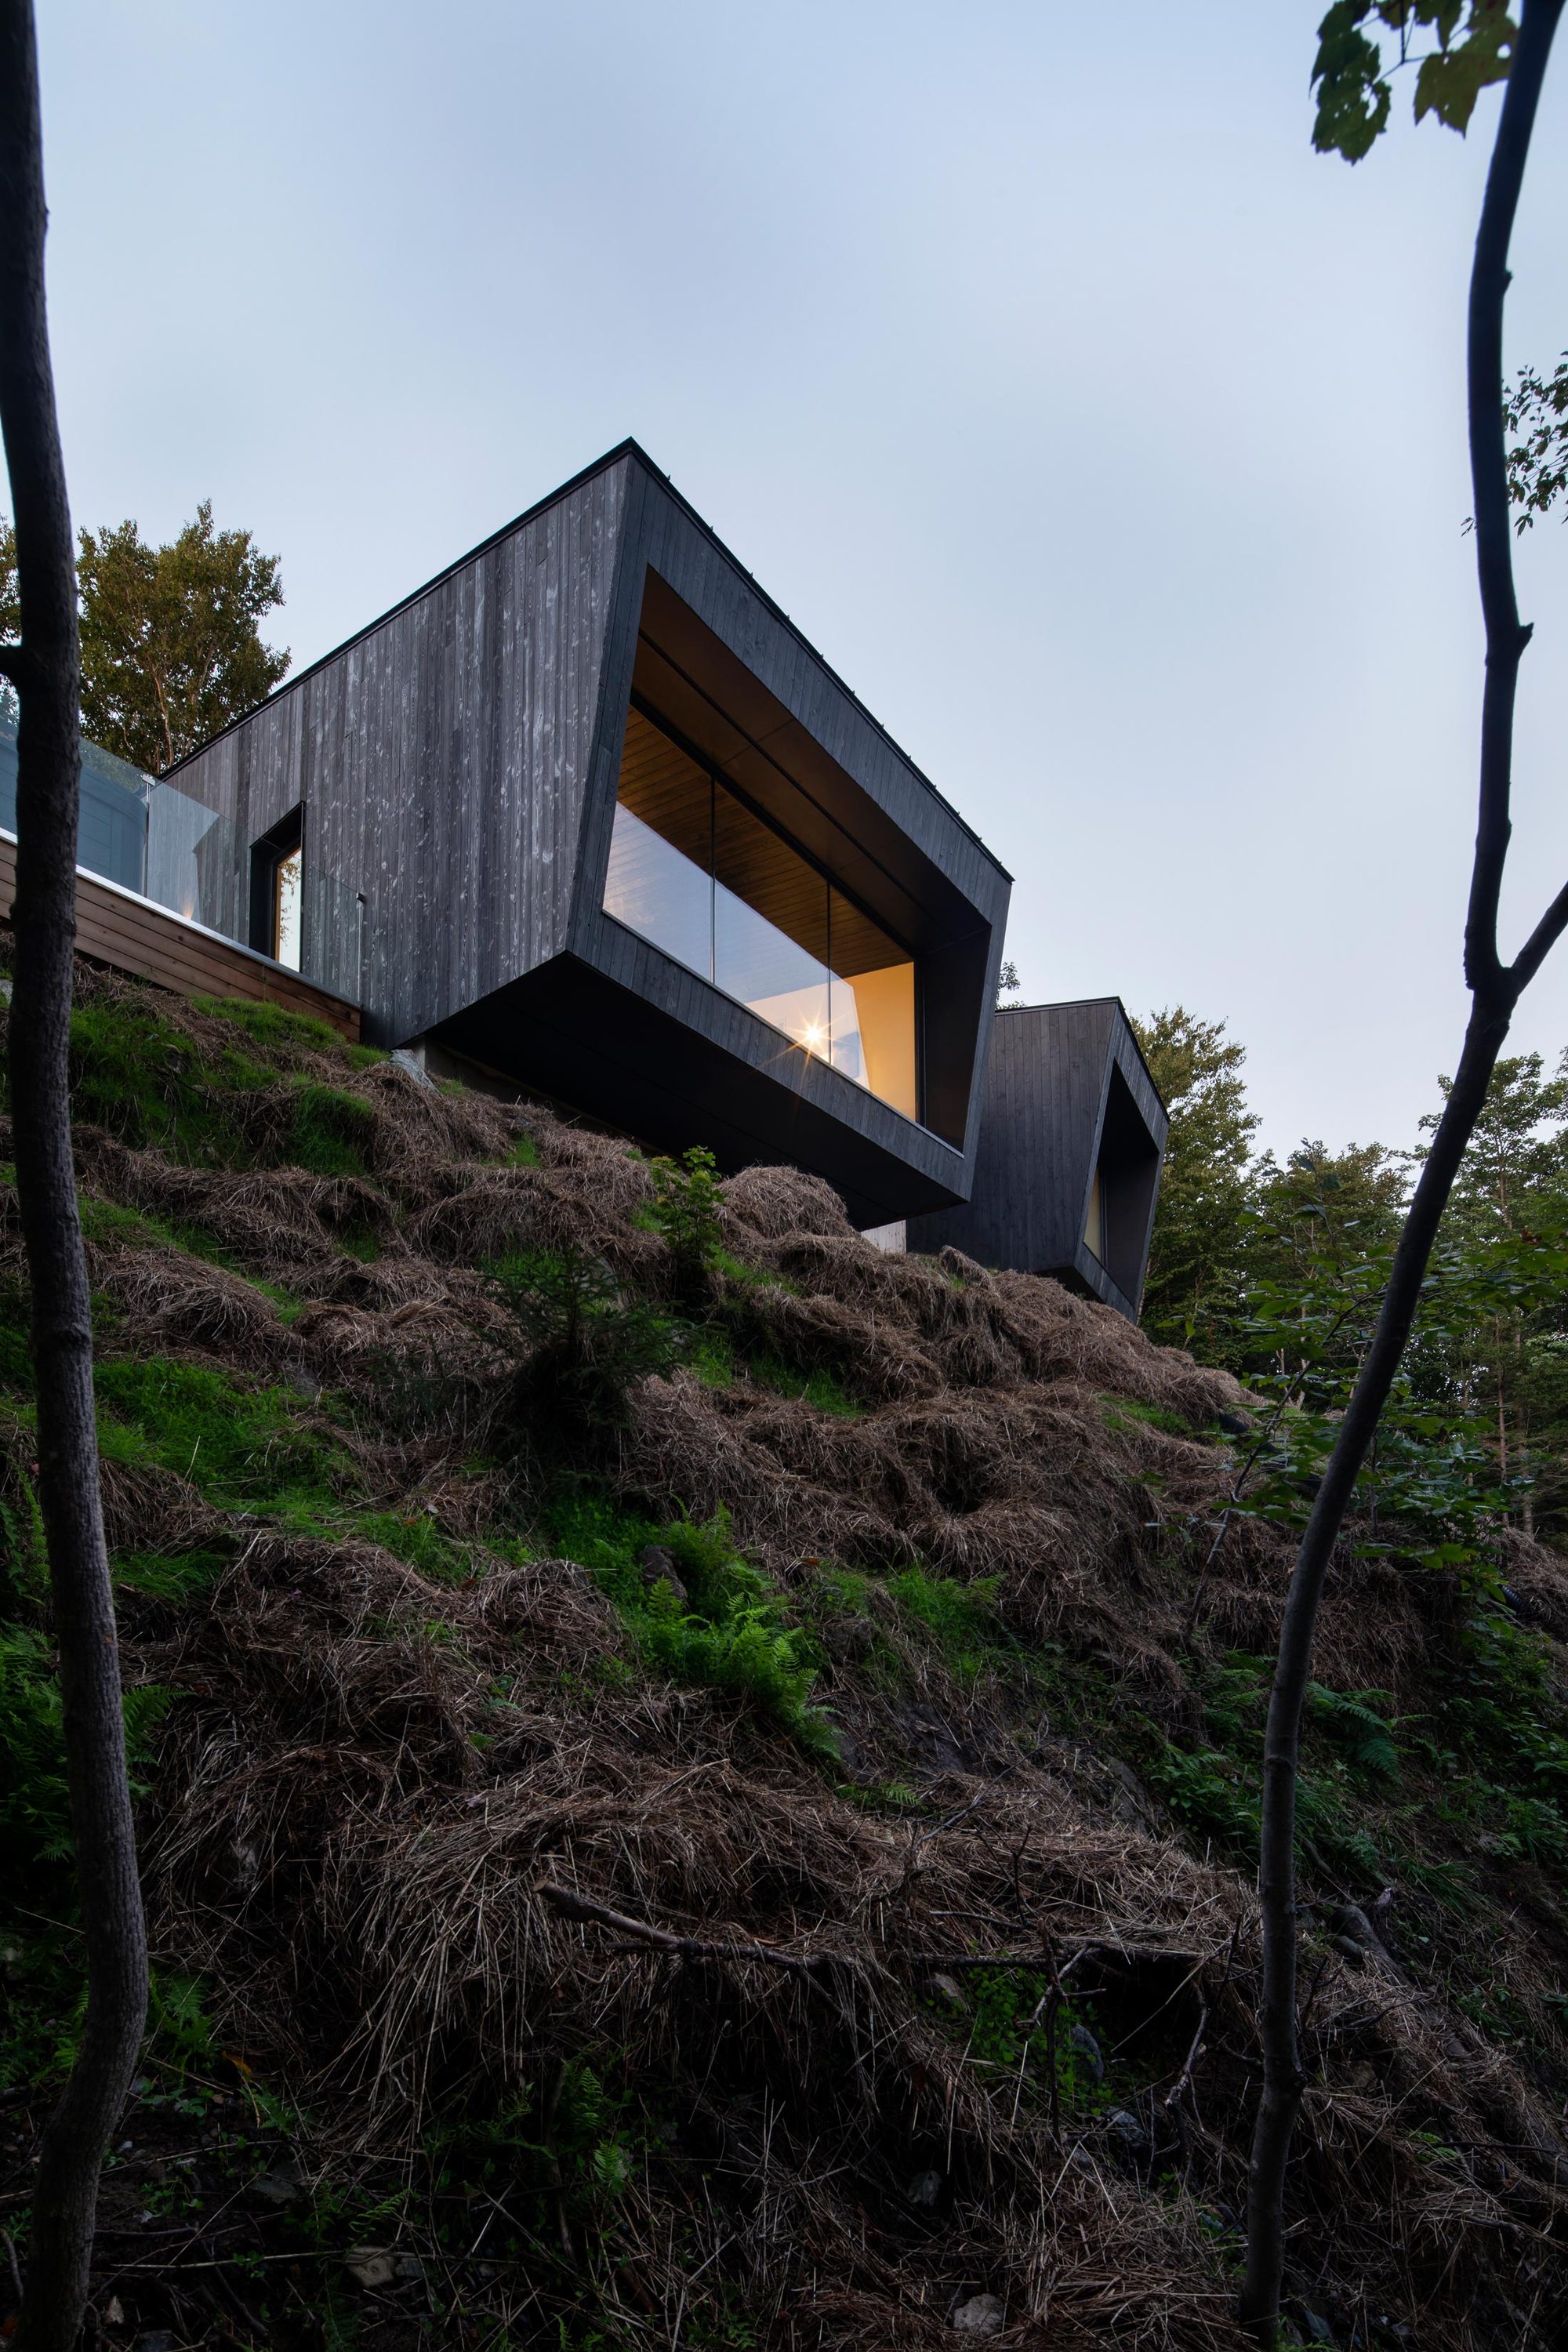 Angular ceiling and floors of the cabin keep you on the edge of the cliff